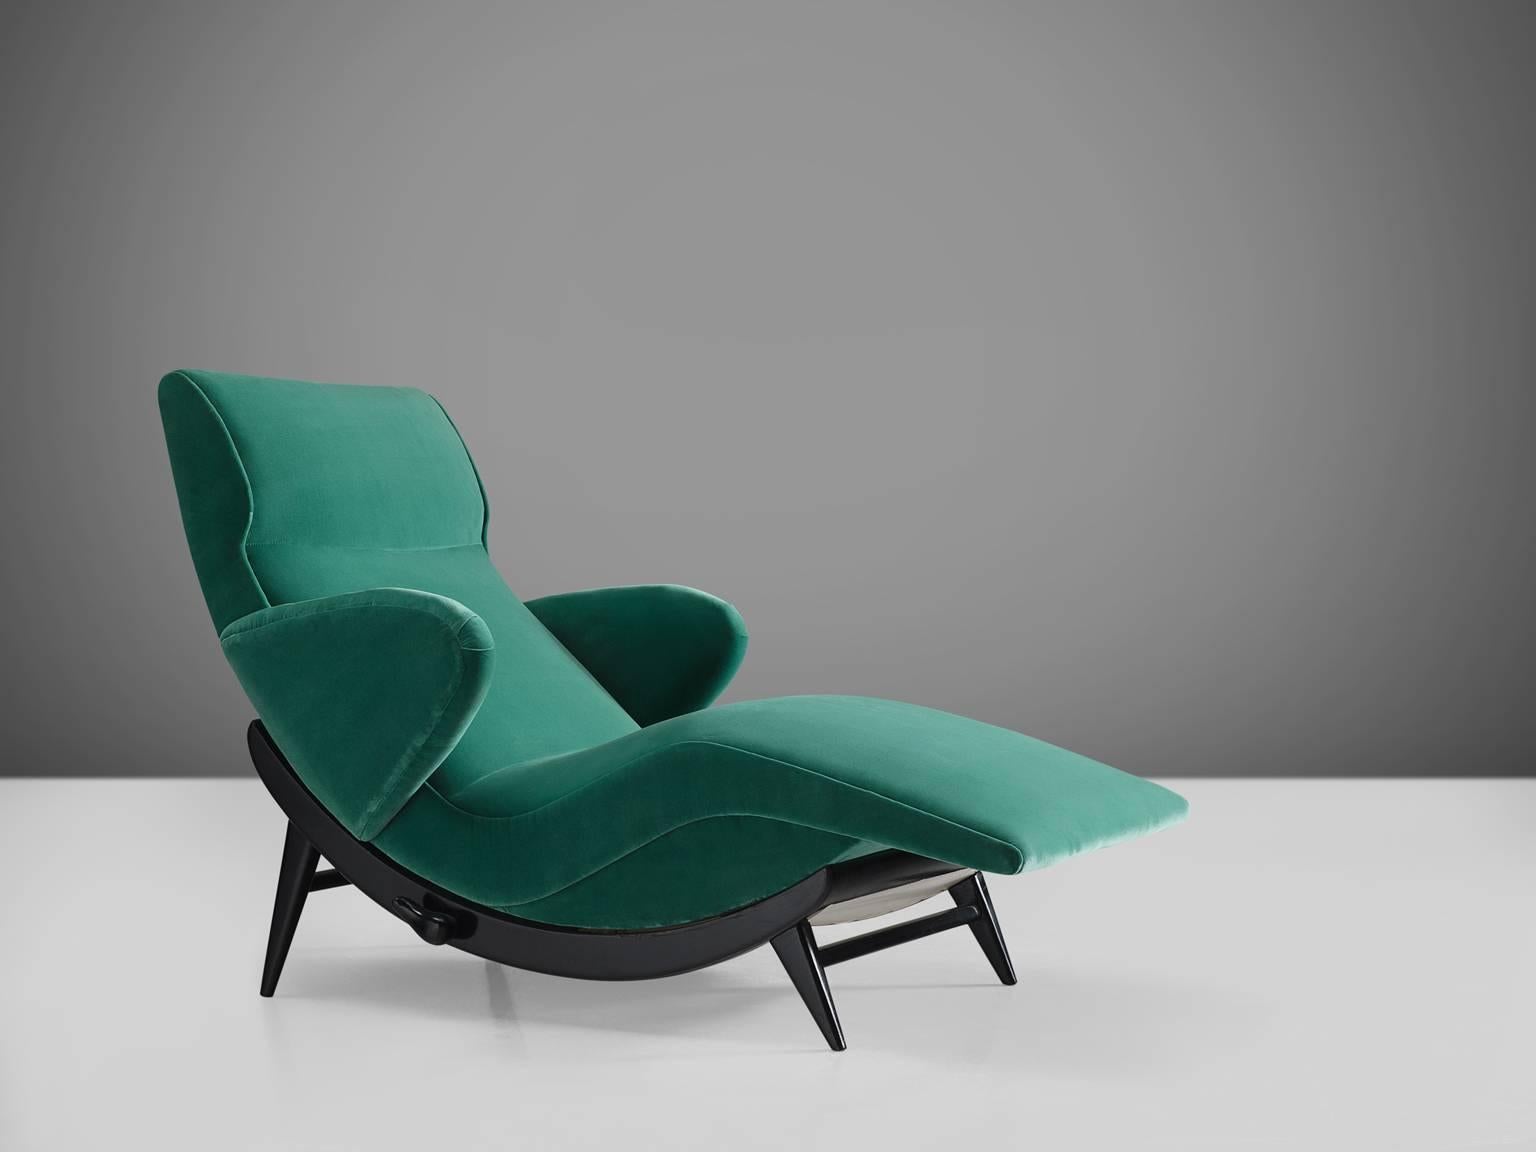 Chaise longue, in beech and fabric, Italy, 1970

This chaise longue is designed in Italy and is part of the midcentury design collection. The stained beech frame is curved and has four tapered legs.  The curved frame in combination with the